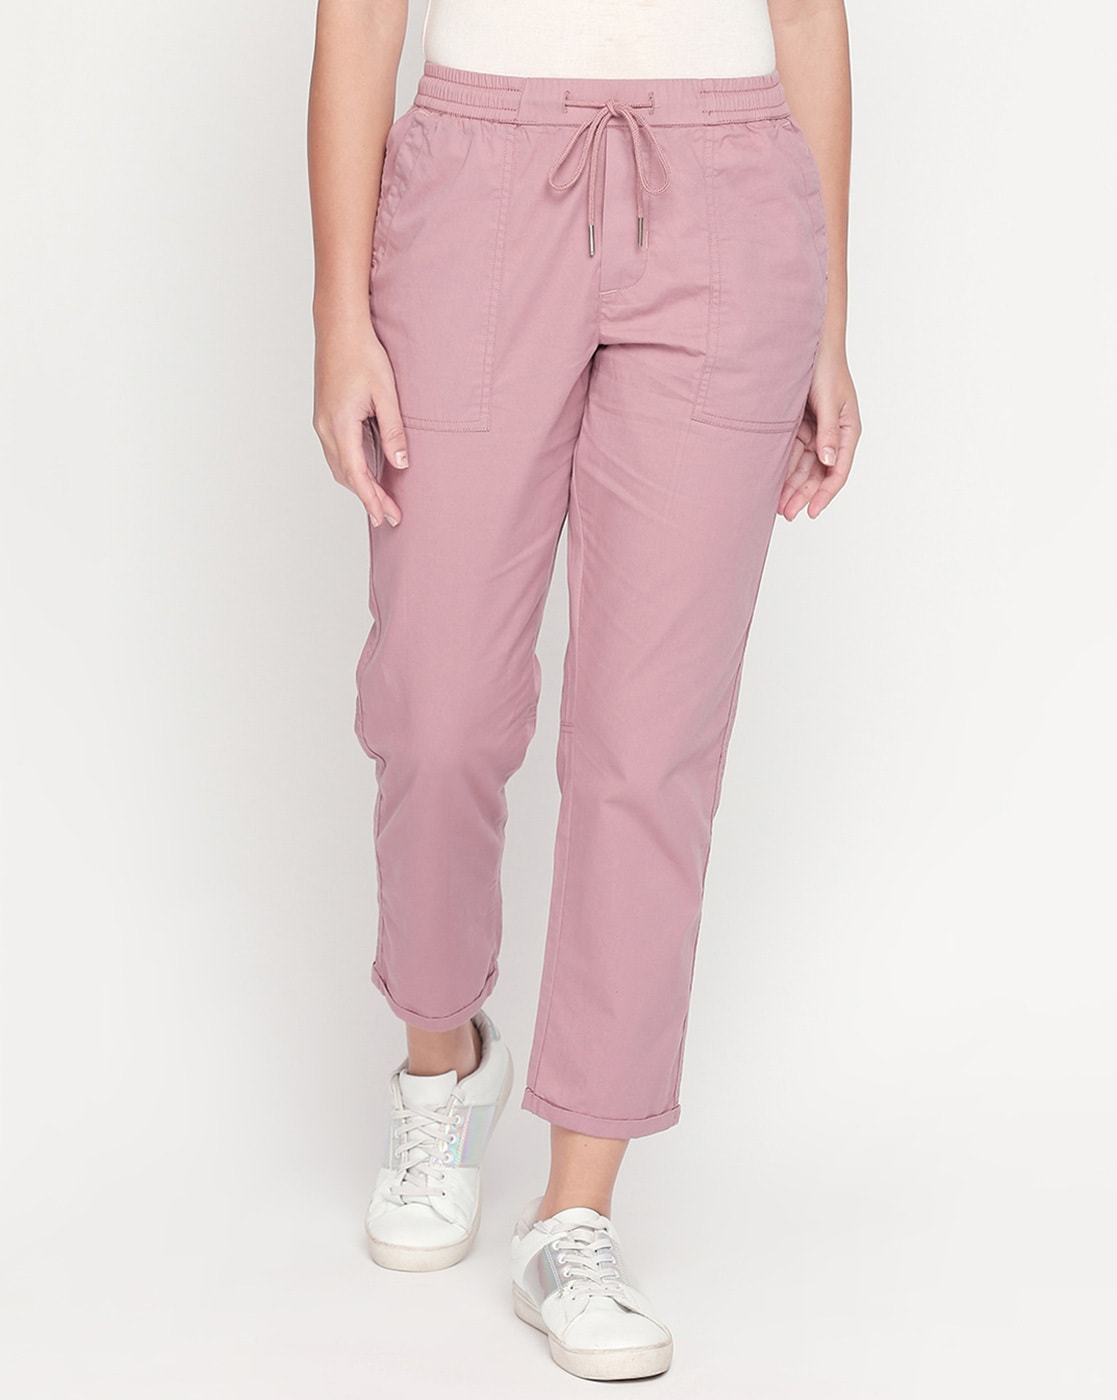 Honey By Pantaloons Trousers  Buy Honey By Pantaloons Trousers online in  India